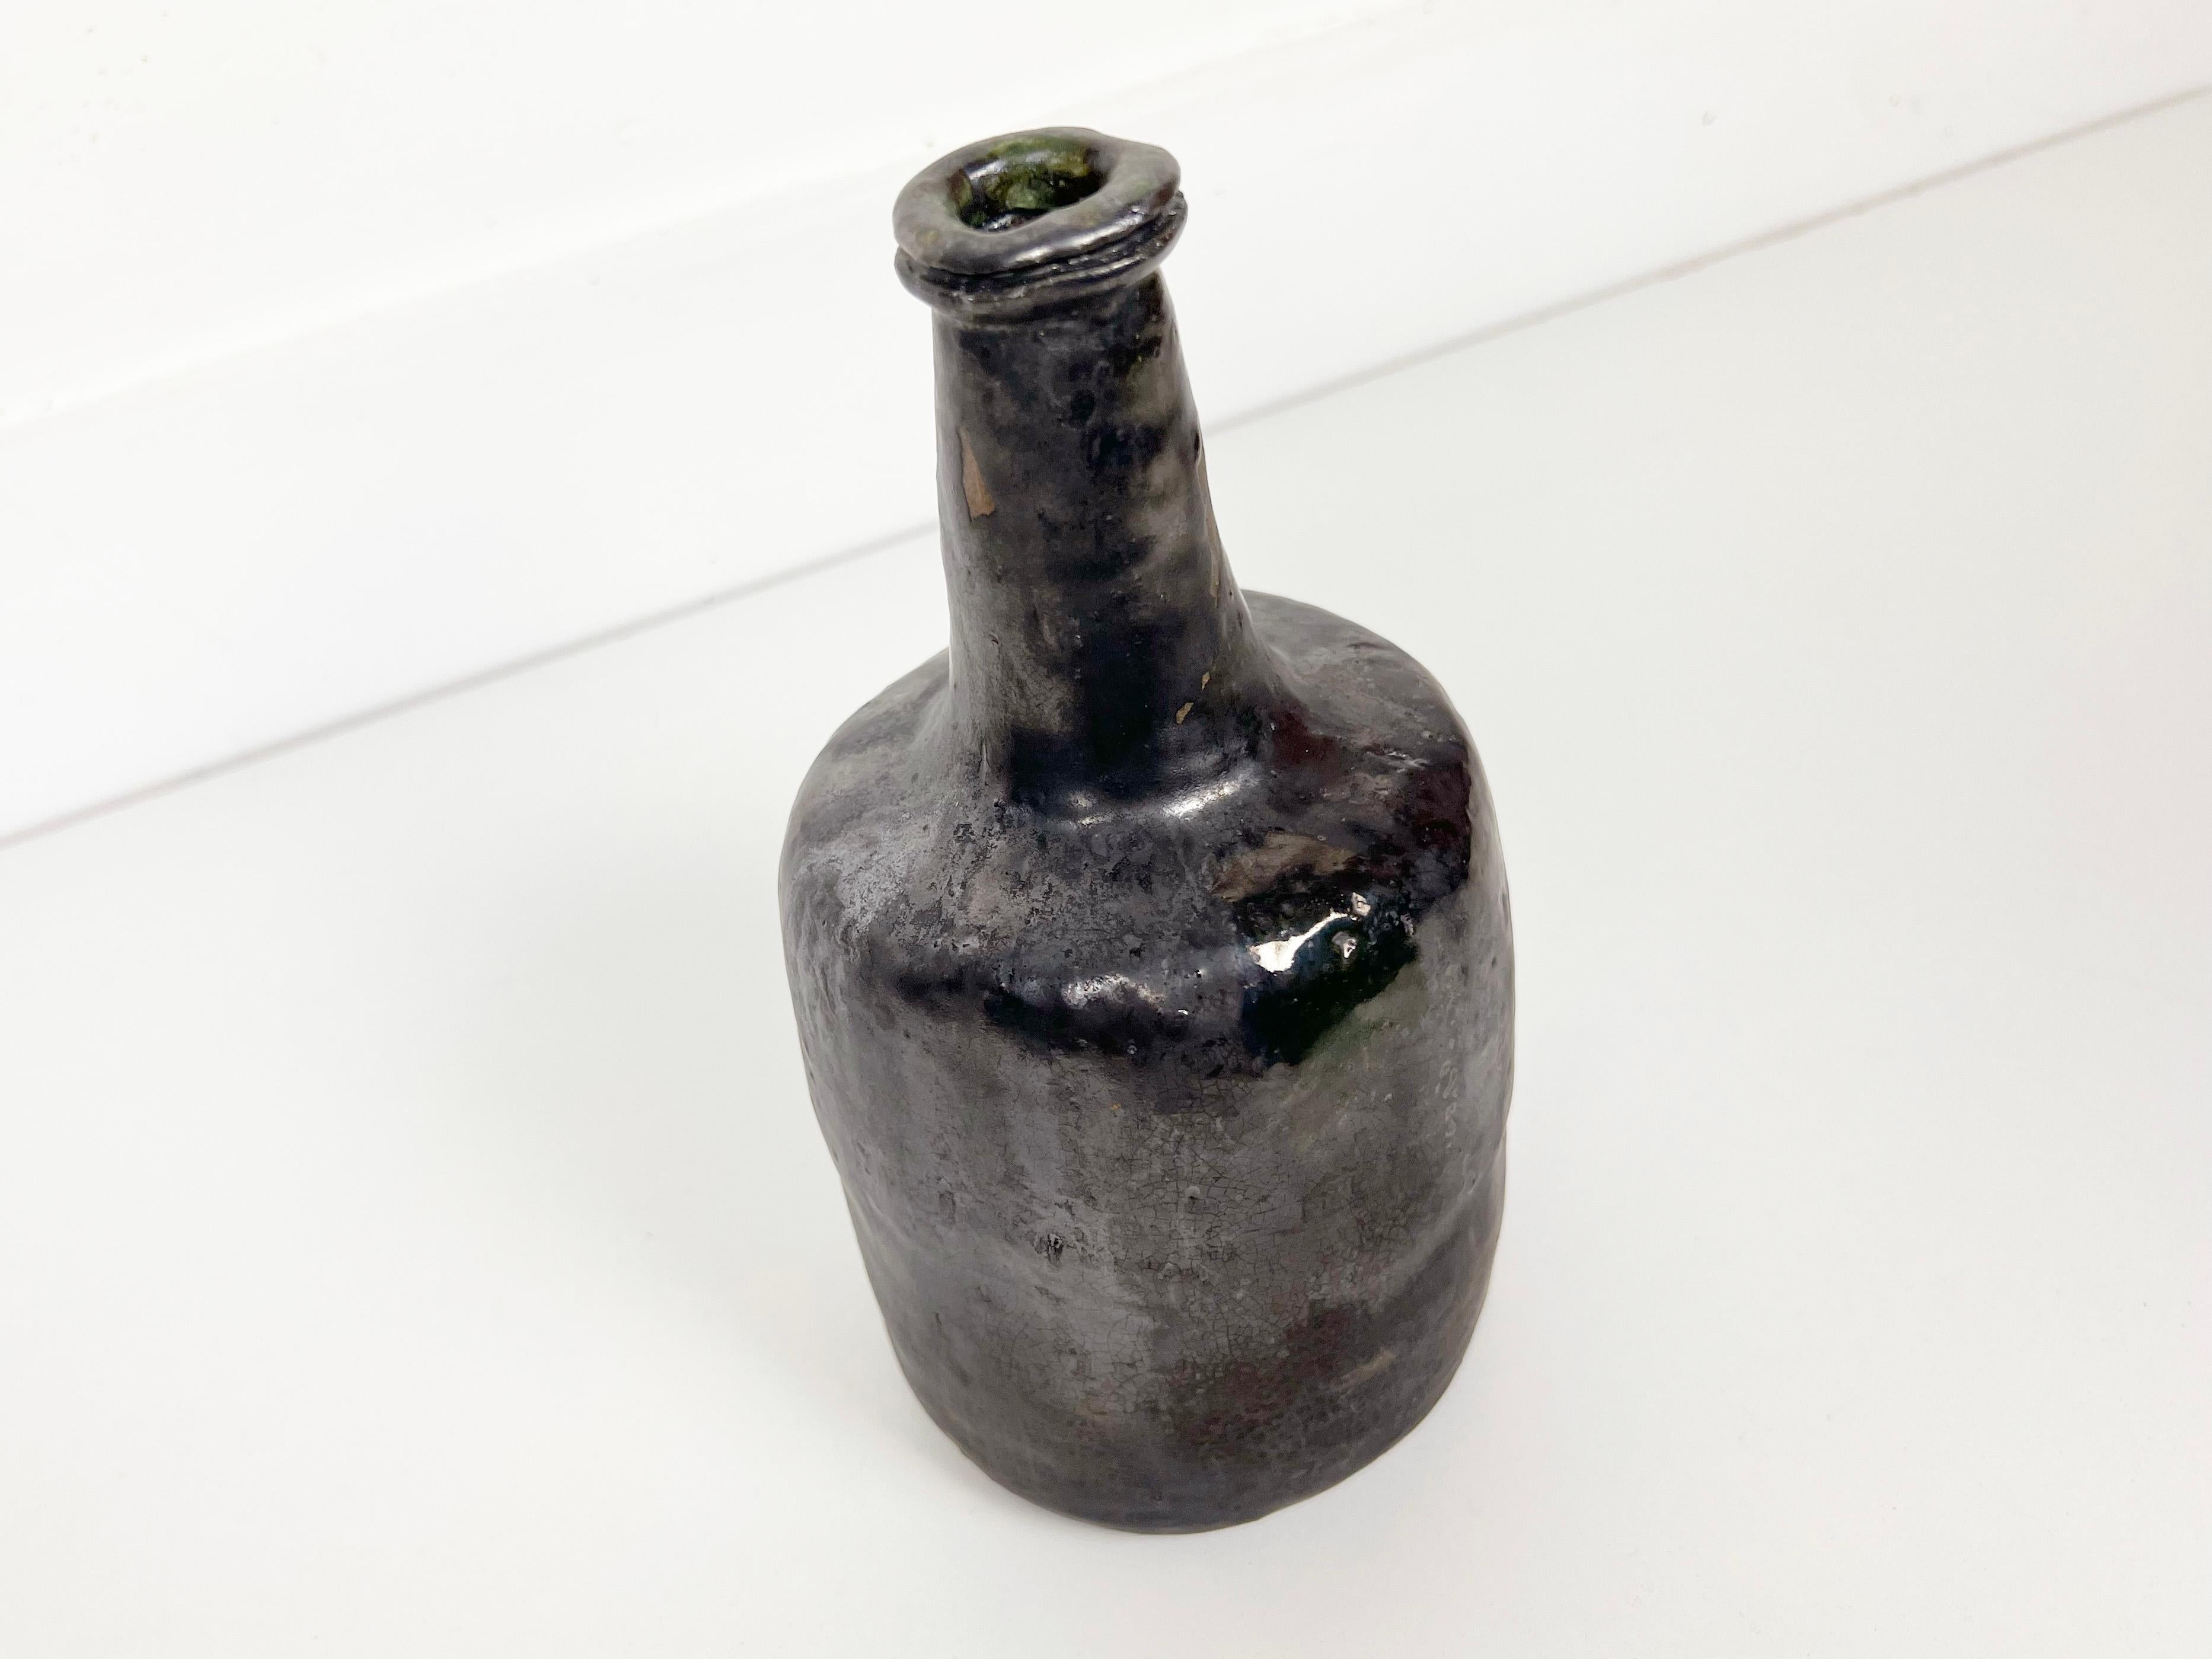 Vintage hand made crude ceramic bottle with black glaze. Signed 'DWO 1961'.

Artist: DWO

Year: 1961

Style: Mid-Century Modern

Dimensions: 9